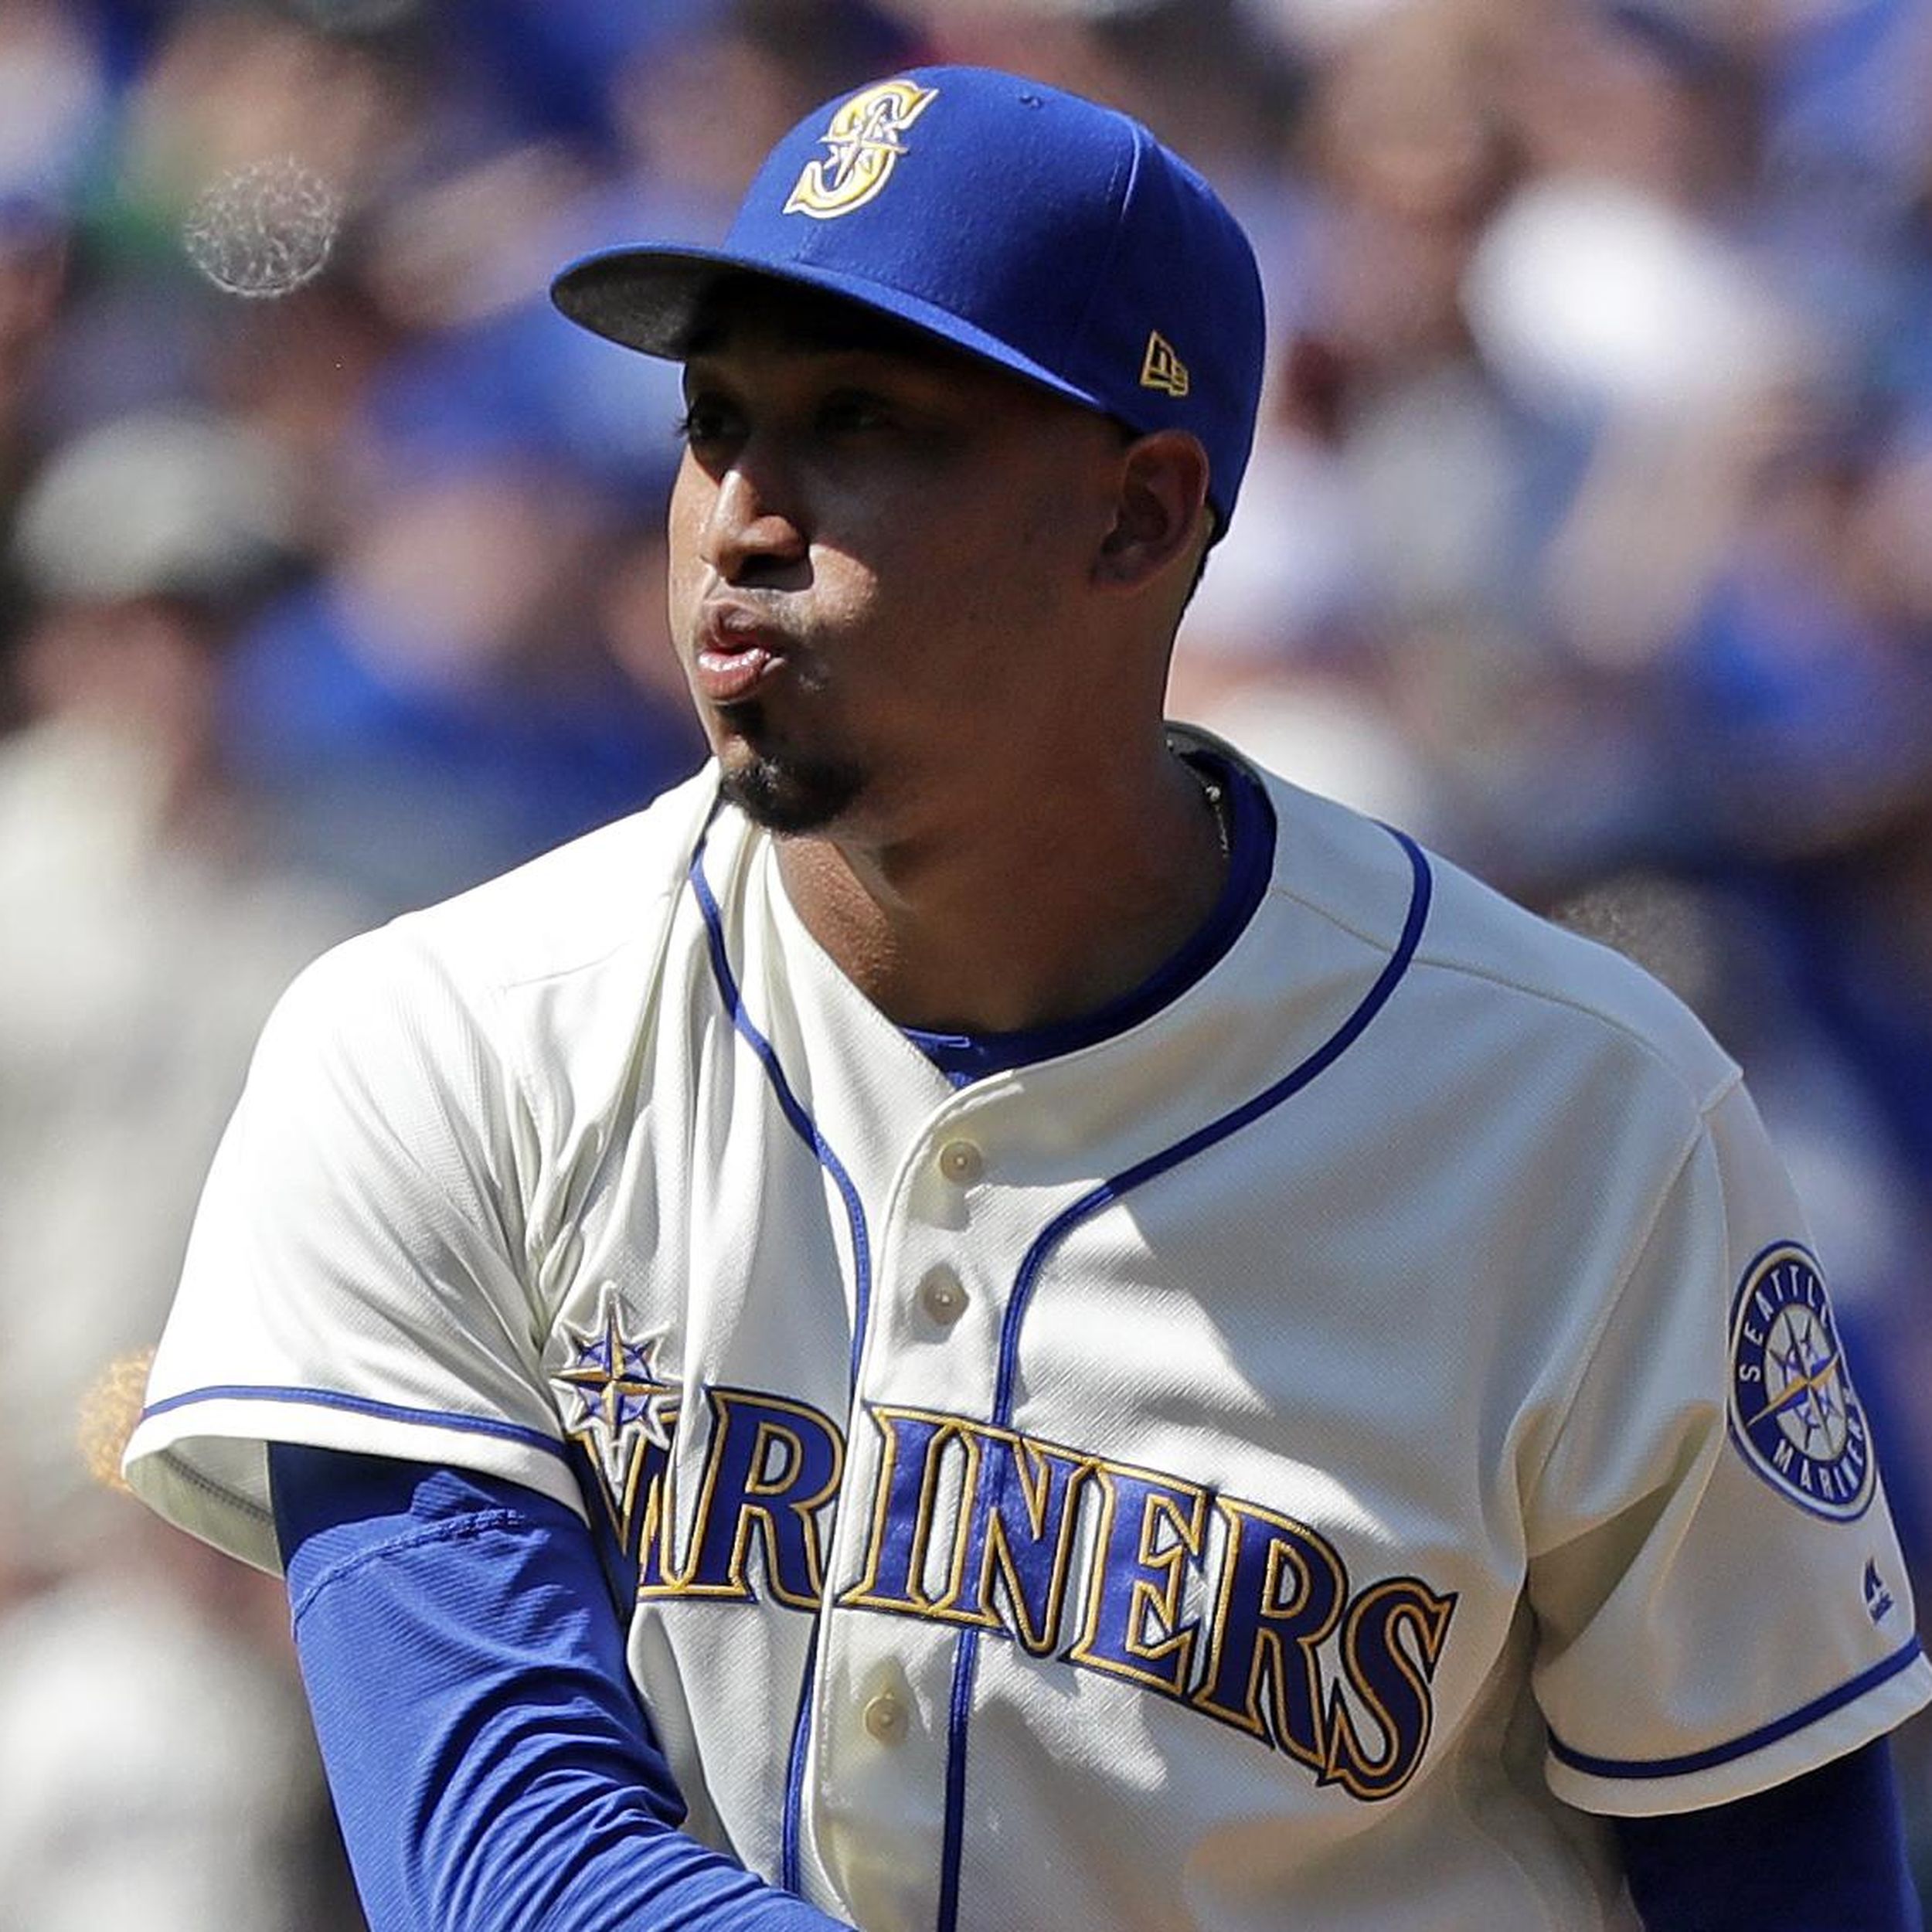 Mariners closer Edwin Diaz named American League Reliever of the